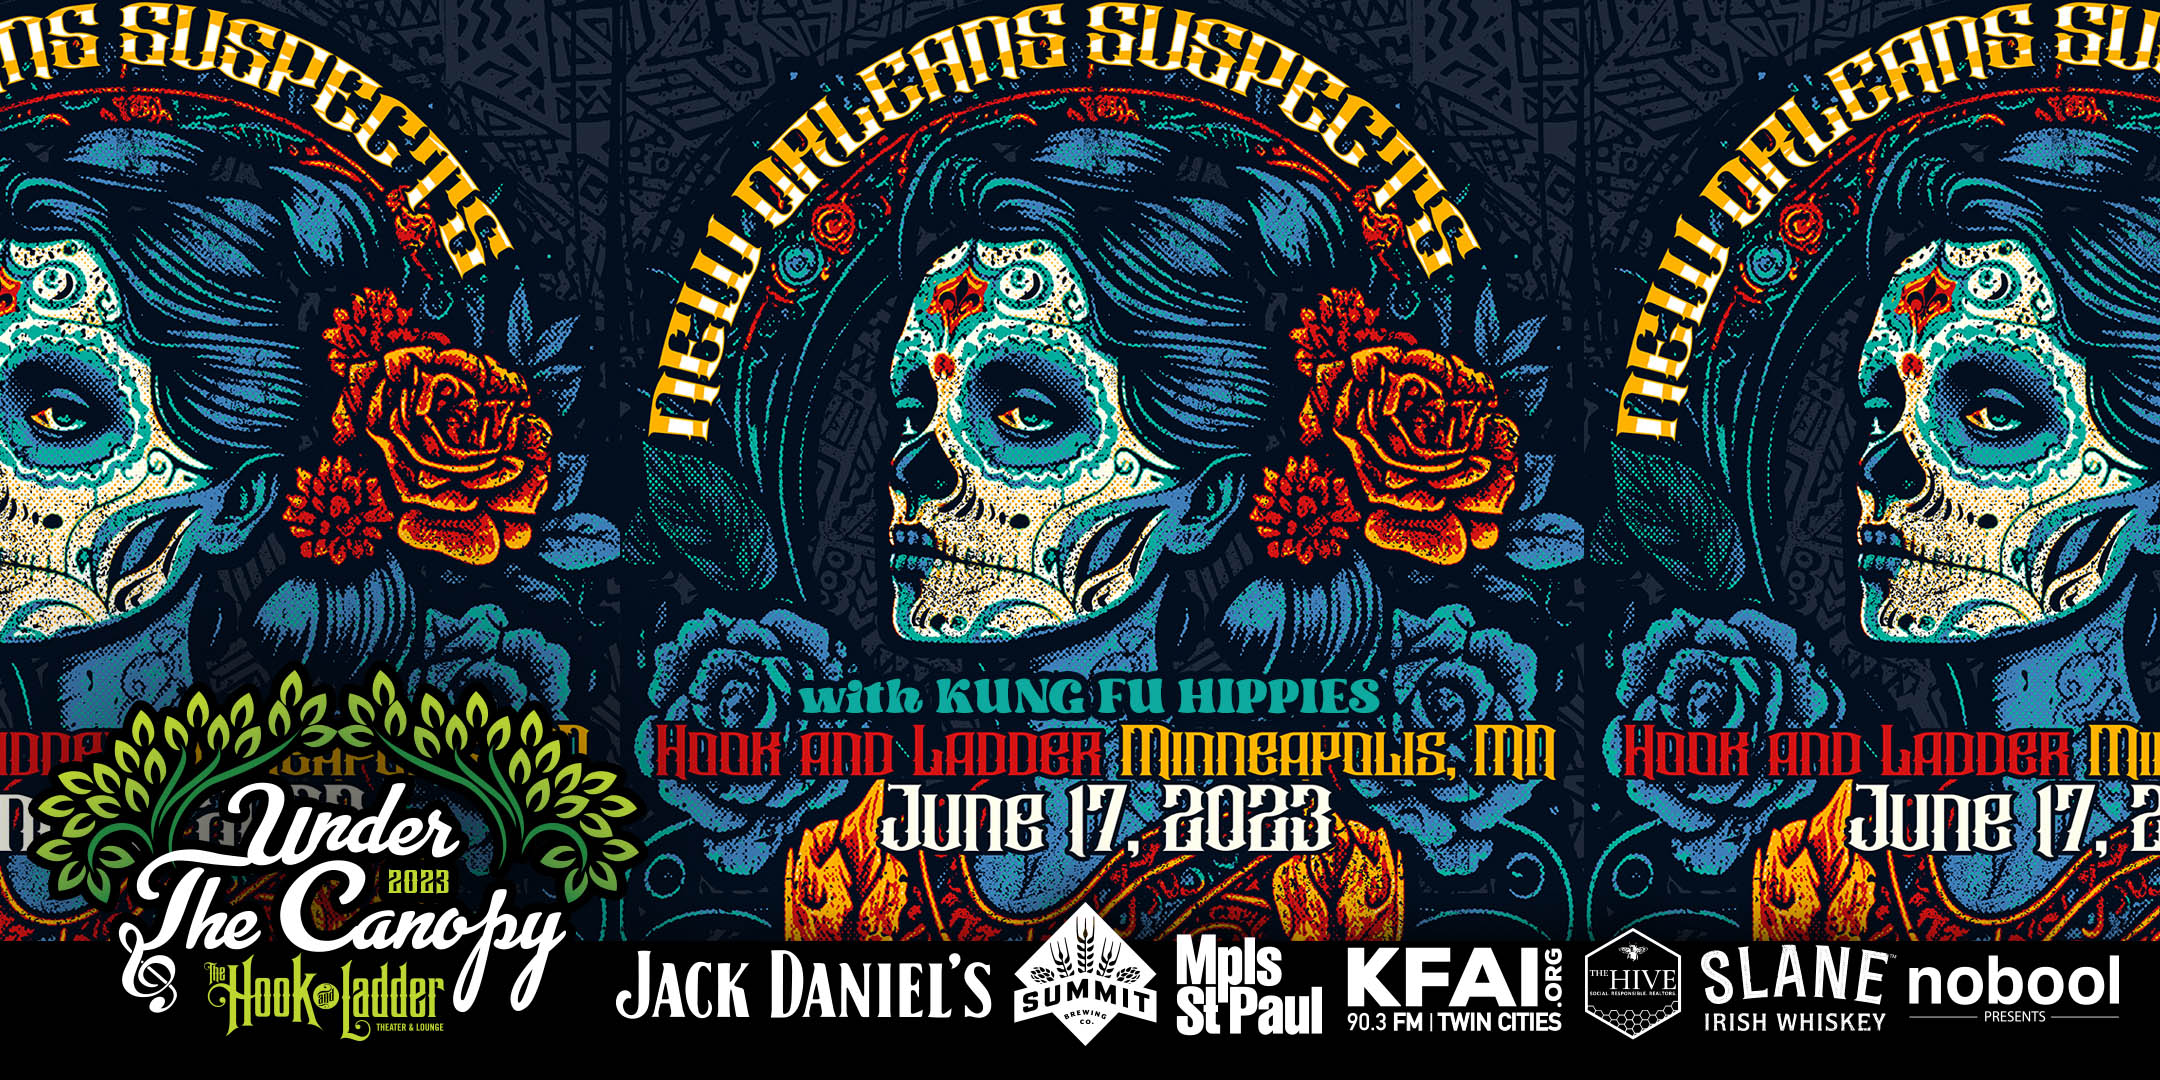 Krewe of DADs presents New Orleans Suspects with guests Kung Fu Hippies Saturday, June 17 Under The Canopy at The Hook and Ladder Theater "An Urban Outdoor Summer Concert Series" Doors 6:00pm :: Music 7:00pm :: 21+ Reserved Seats: $40 GA: $30 ADV / $36 DOS VIP: $48 (Includes Under The Canopy + Late Night)